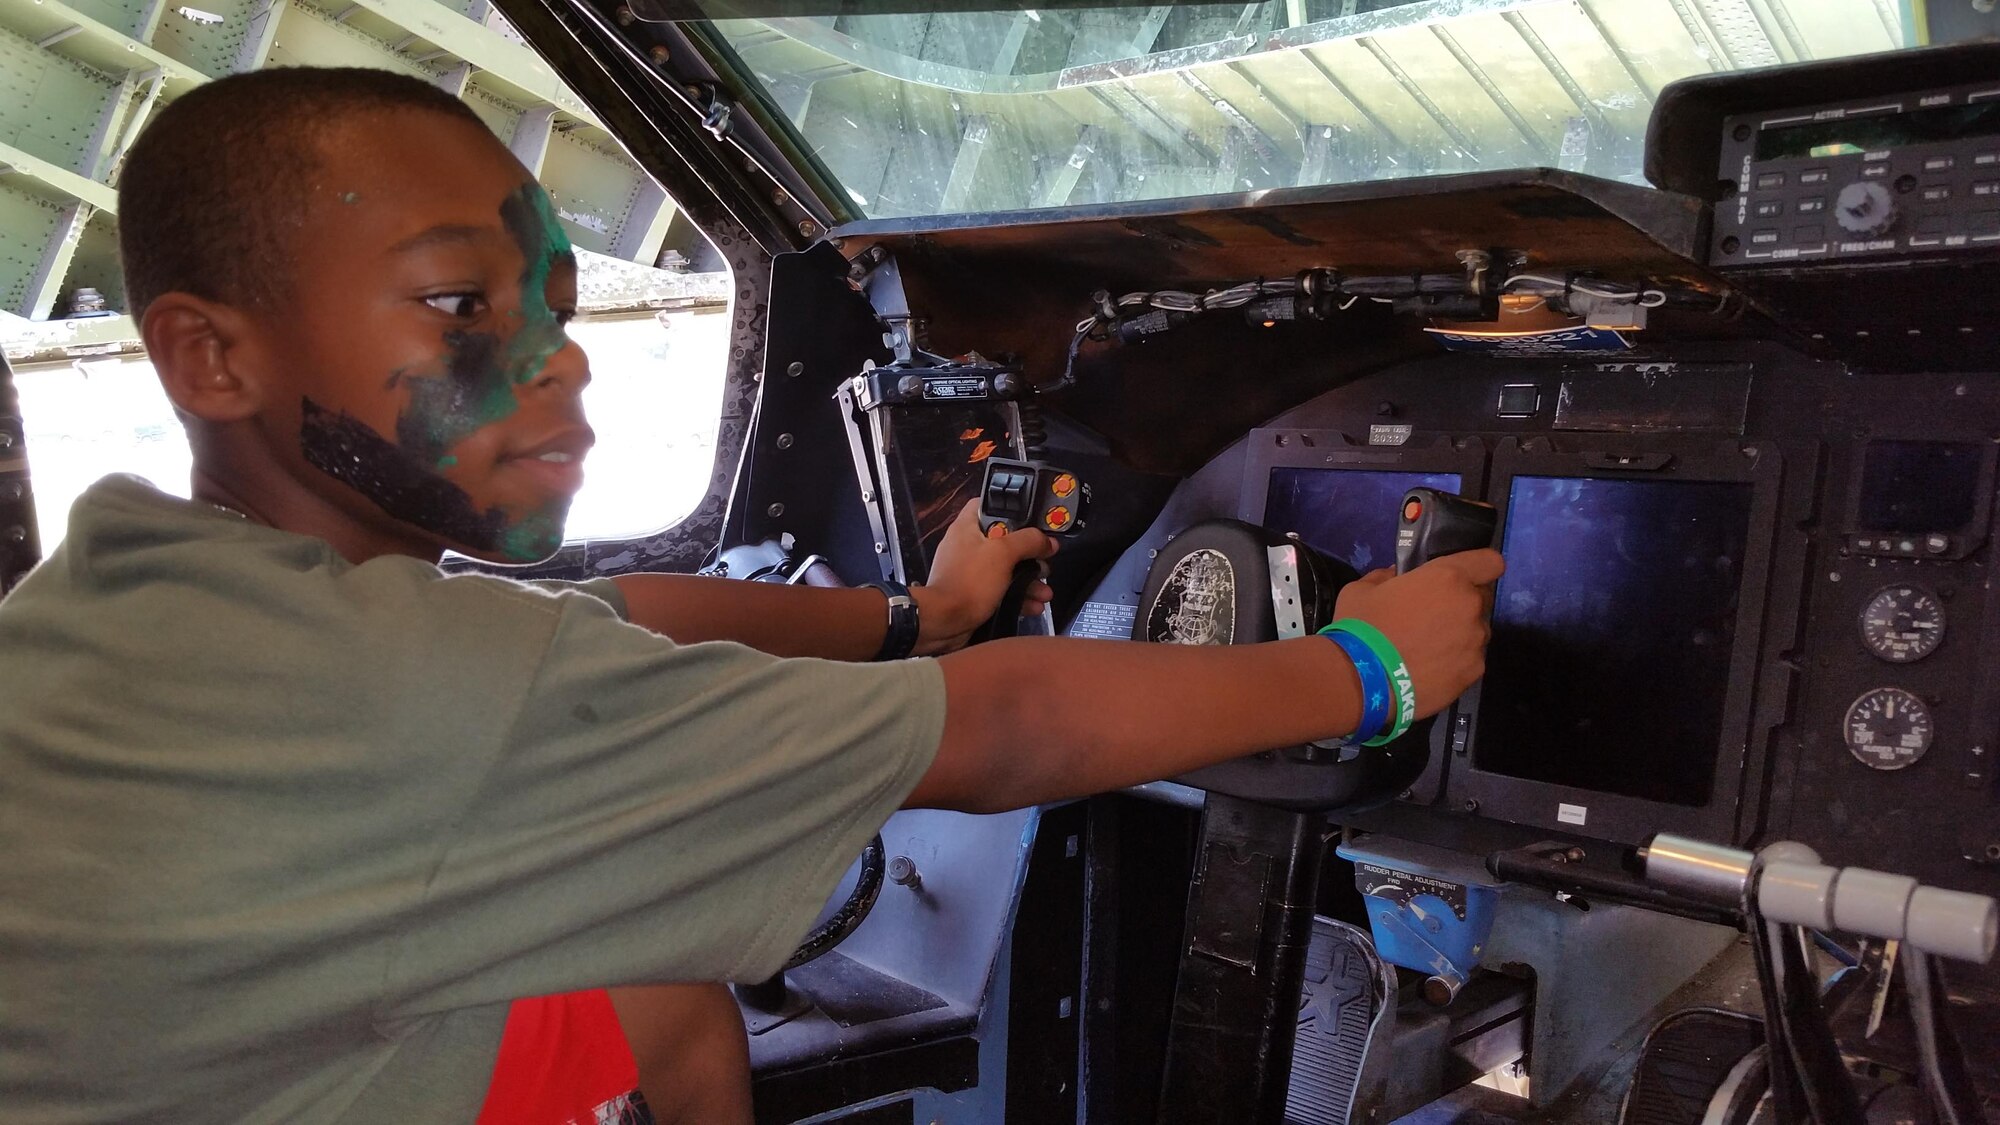 Jordan Davis handles the yoke of a 433rd Airlift Wing C-5A Galaxy on July 31, 2015 at Joint Base San Antonio, Texas during a mock deployment for military children. Jordan was one of over 200 children who took part in the event. Stations were set up to apply facial camouflage, do physical fitness activities, learn self aid and buddy care, and see weapons were among the features of the mock deployment. (U.S. Air Force photo/Tech. Sgt. Carlos J. Trevino)
